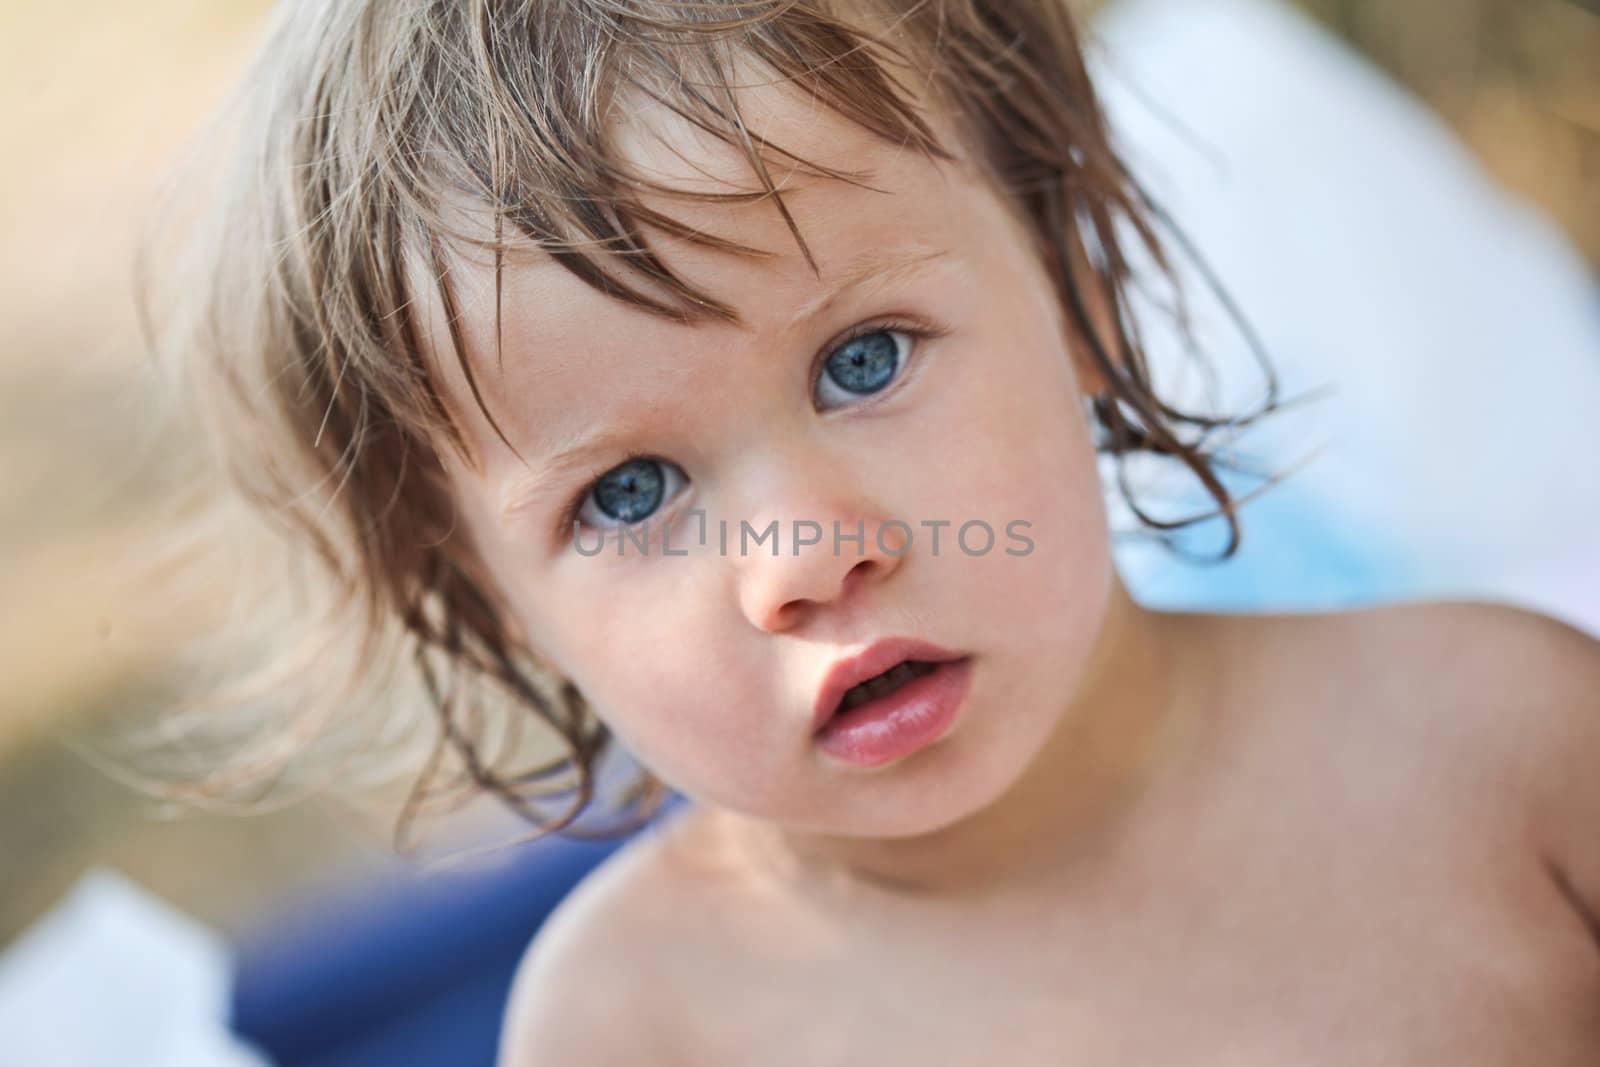 people series: portrait of little girl with wet hair